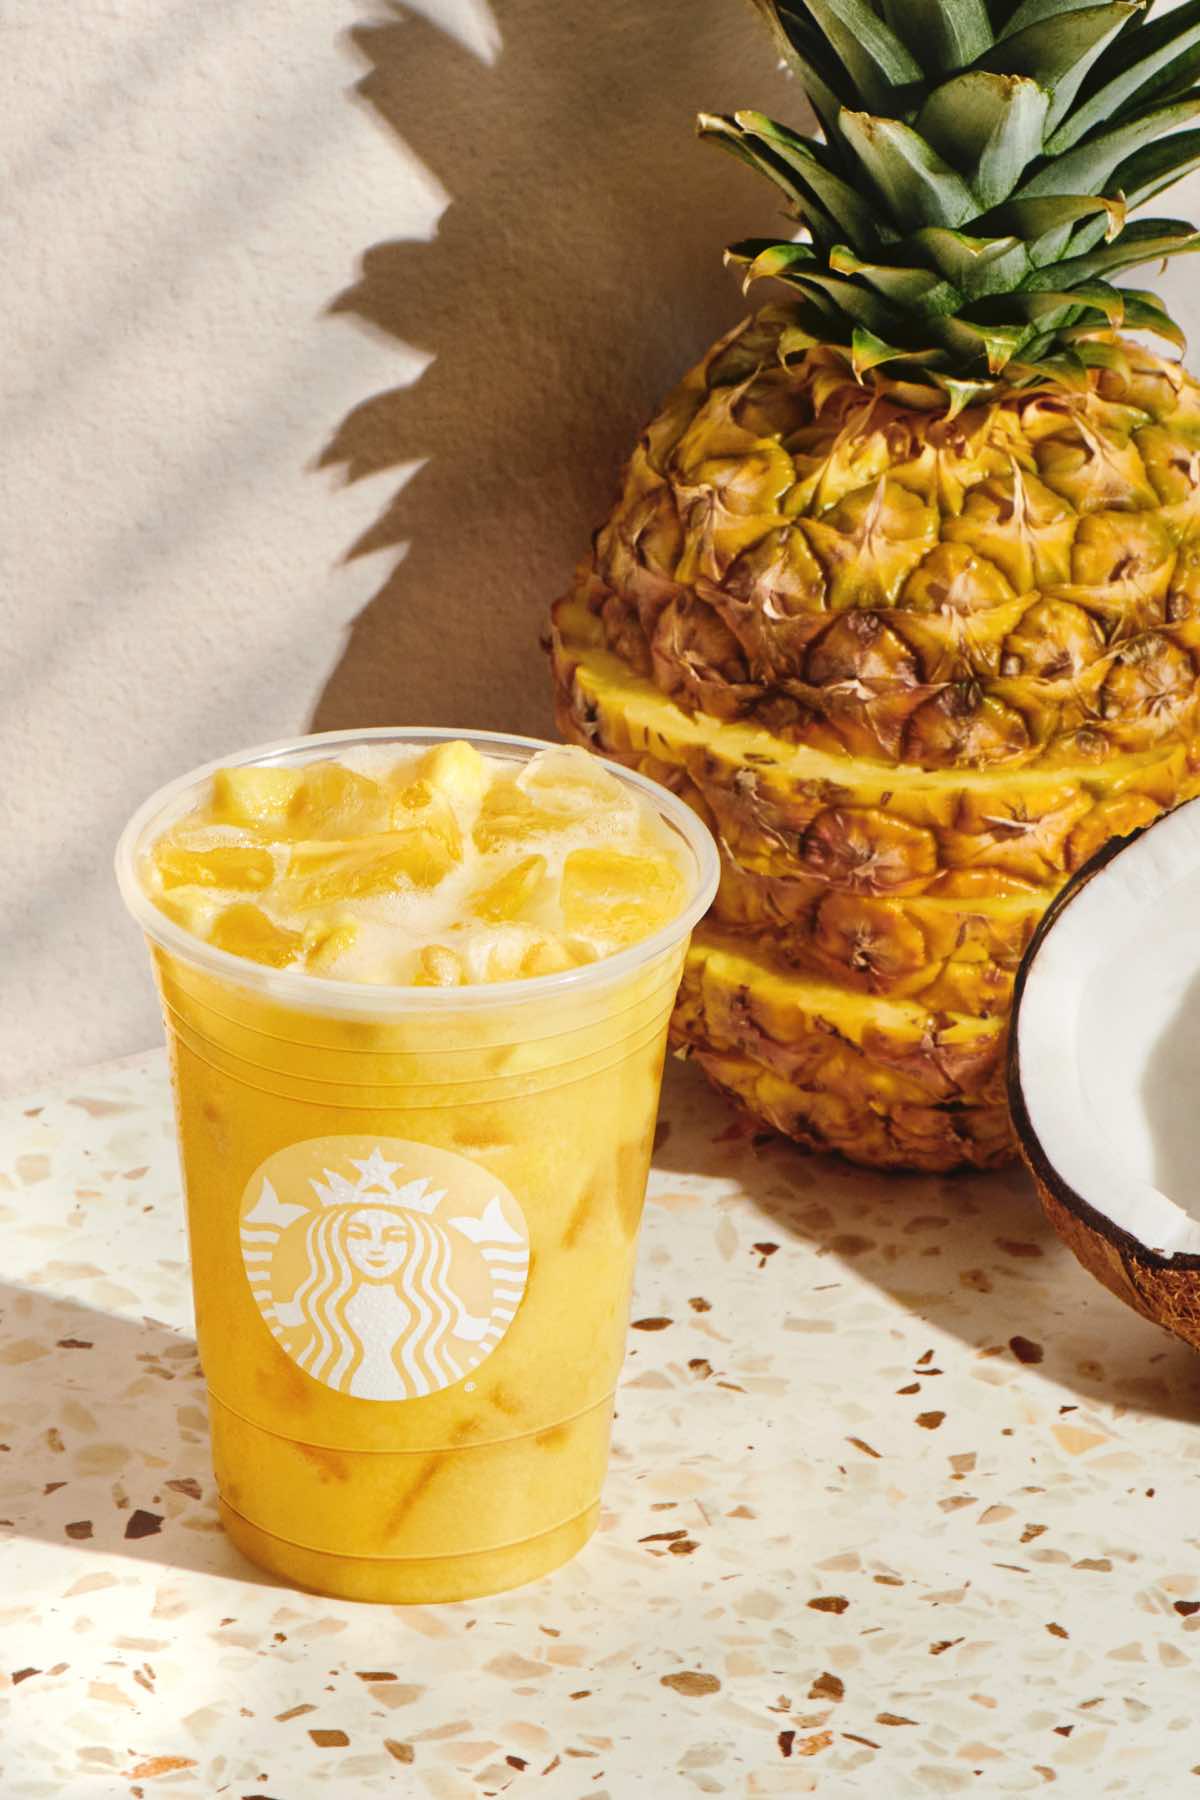 Paradise Drink in a Starbucks cup with pineapple and coconut behind the glass.